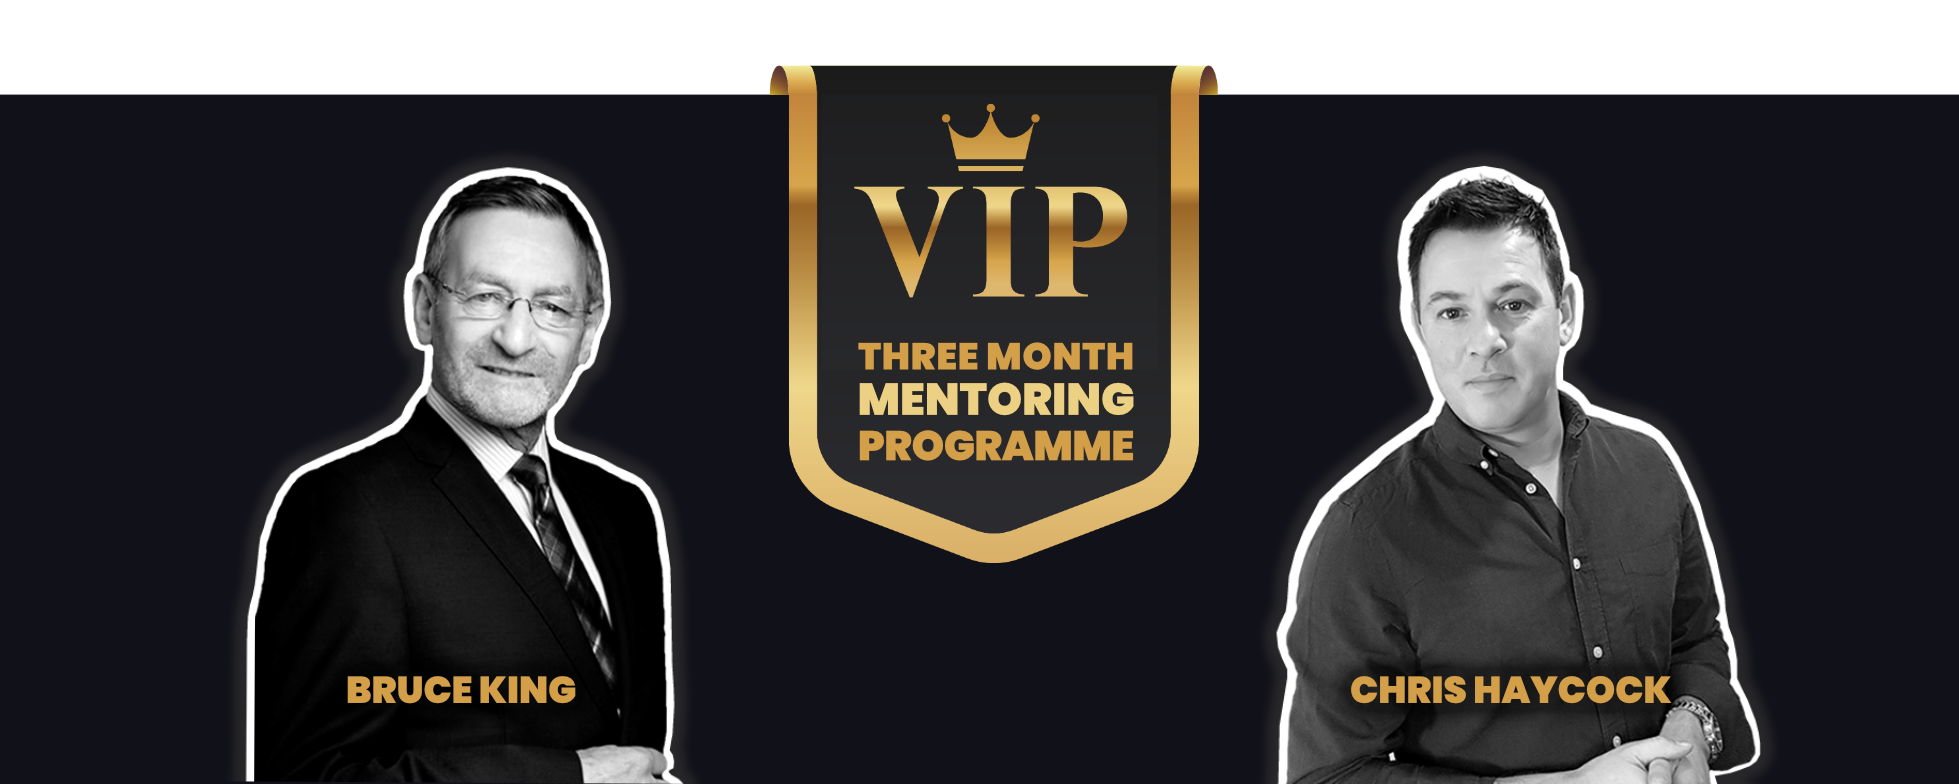 The Rainmakers VIP Mentoring Programme